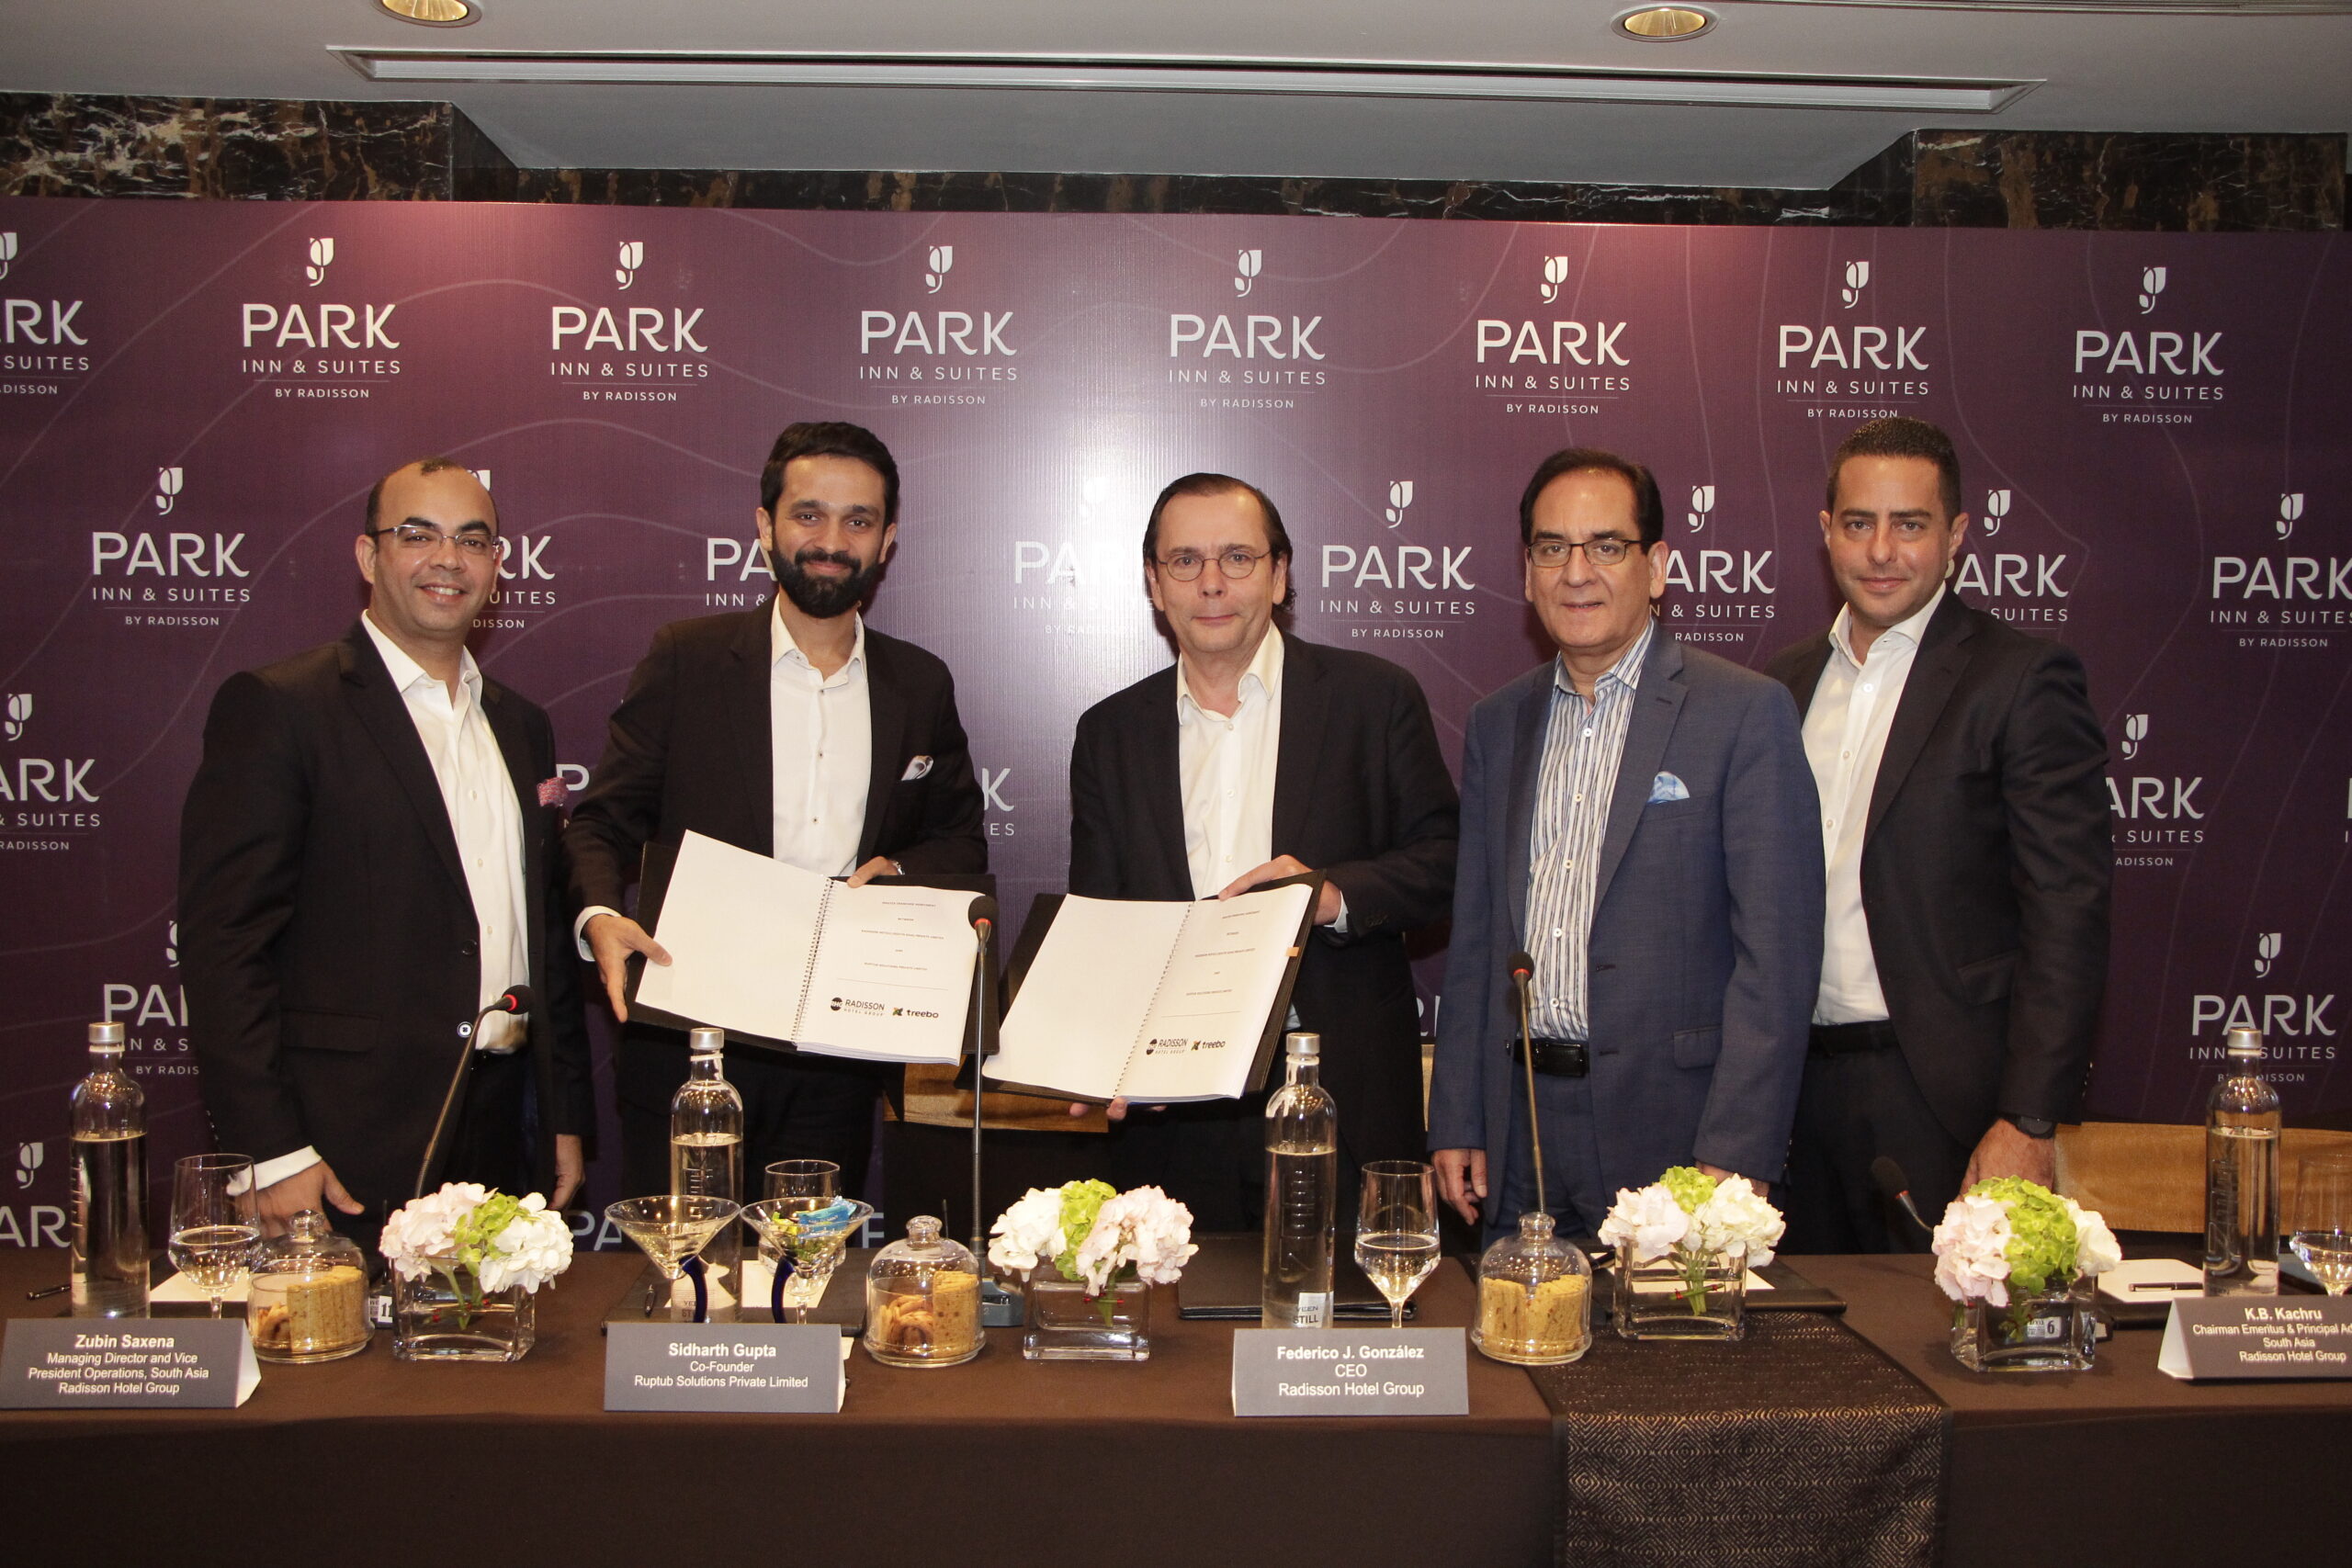 Radisson Hotel Group launches new midscale brand Park Inn & Suites by Radisson in India